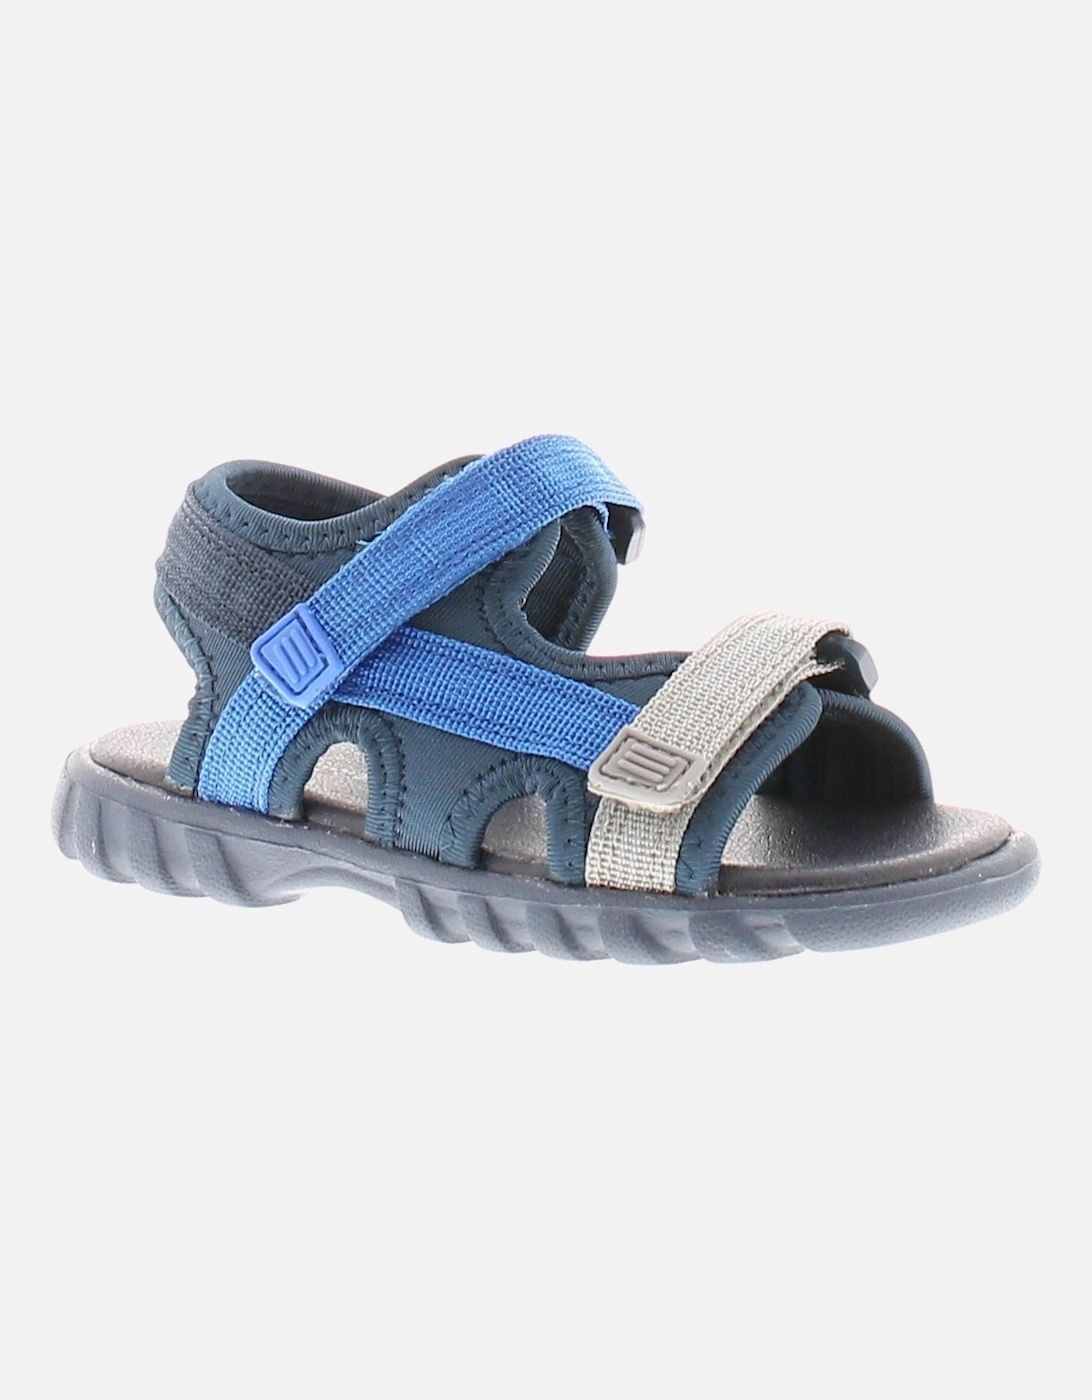 Infants Boys Sandals Liam Touch Fastening blue UK Size, 6 of 5